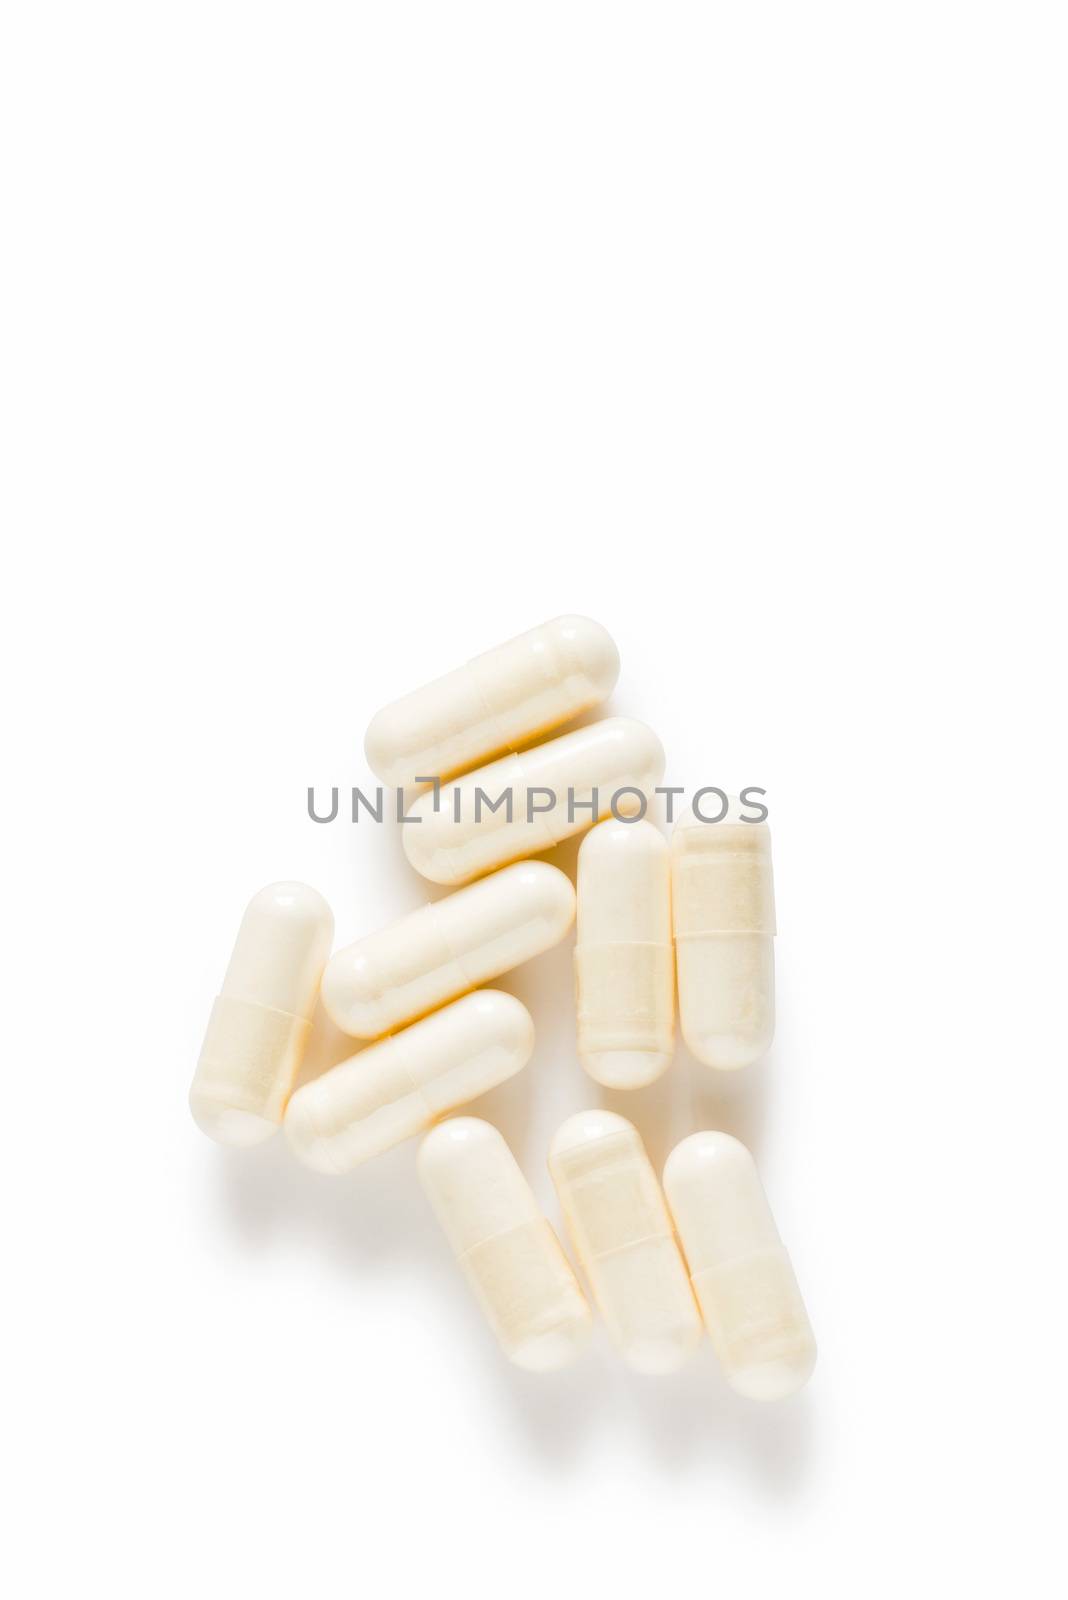 Ten yoghurt capsules isolated on a white background. Yoghurt Capsules aid in maintaining a normal healthy gastrointestinal system and digestive function.